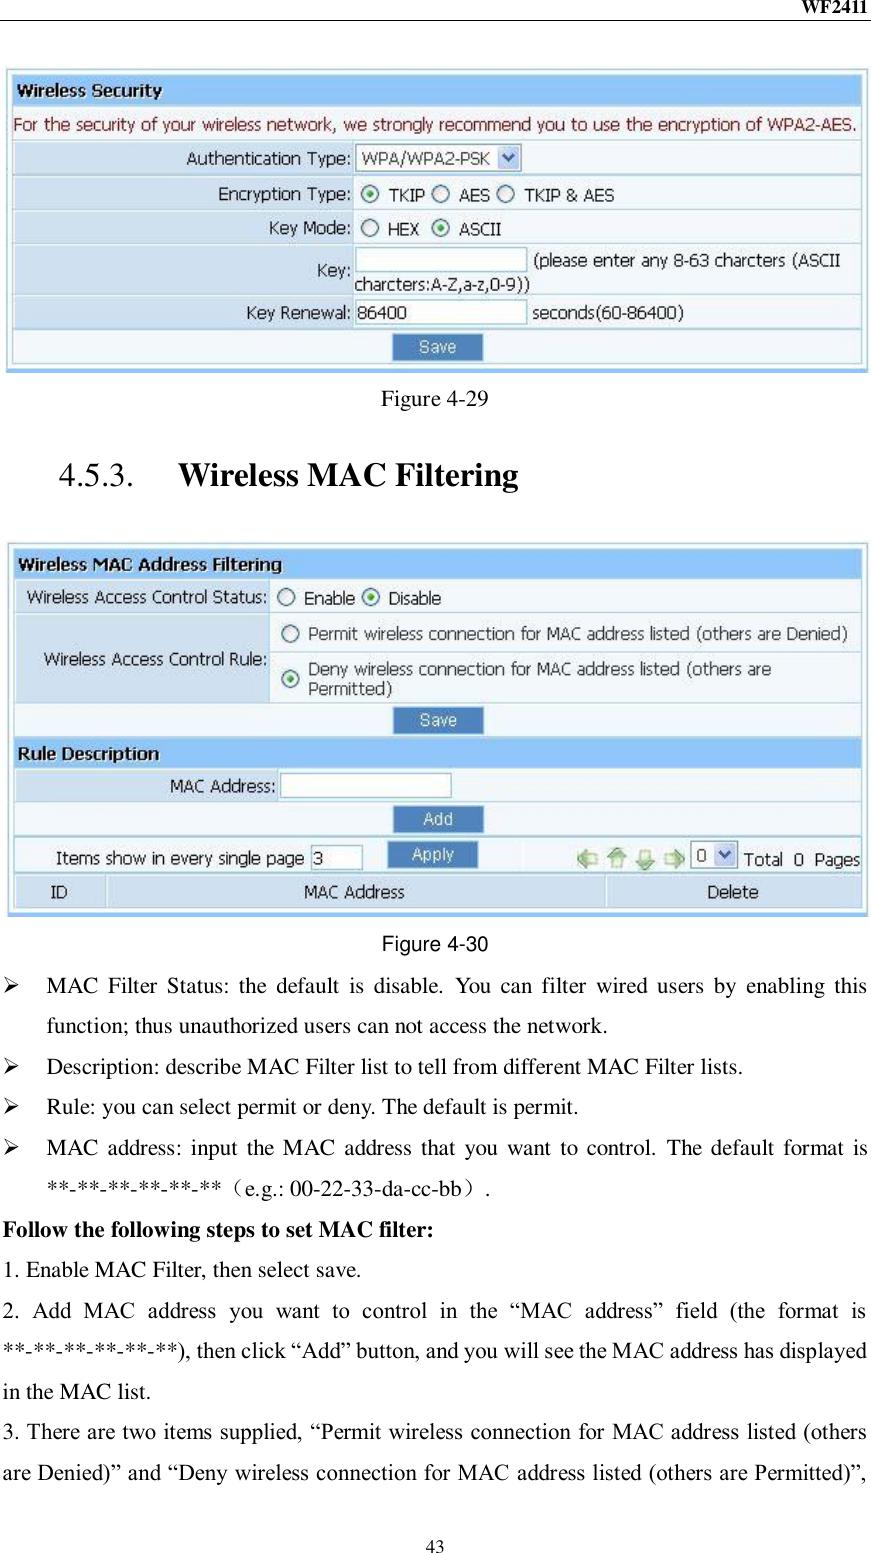 WF2411  43  Figure 4-29 4.5.3. Wireless MAC Filtering  Figure 4-30  MAC  Filter  Status: the  default  is  disable.  You  can filter  wired  users  by  enabling  this function; thus unauthorized users can not access the network.  Description: describe MAC Filter list to tell from different MAC Filter lists.  Rule: you can select permit or deny. The default is permit.  MAC address: input the  MAC address that you want  to control.  The default format  is **-**-**-**-**-**（e.g.: 00-22-33-da-cc-bb）. Follow the following steps to set MAC filter:   1. Enable MAC Filter, then select save. 2.  Add  MAC  address  you  want  to  control  in  the  “MAC  address”  field  (the  format  is **-**-**-**-**-**), then click “Add” button, and you will see the MAC address has displayed in the MAC list. 3. There are two items supplied, “Permit wireless connection for MAC address listed (others are Denied)” and “Deny wireless connection for MAC address listed (others are Permitted)”, 